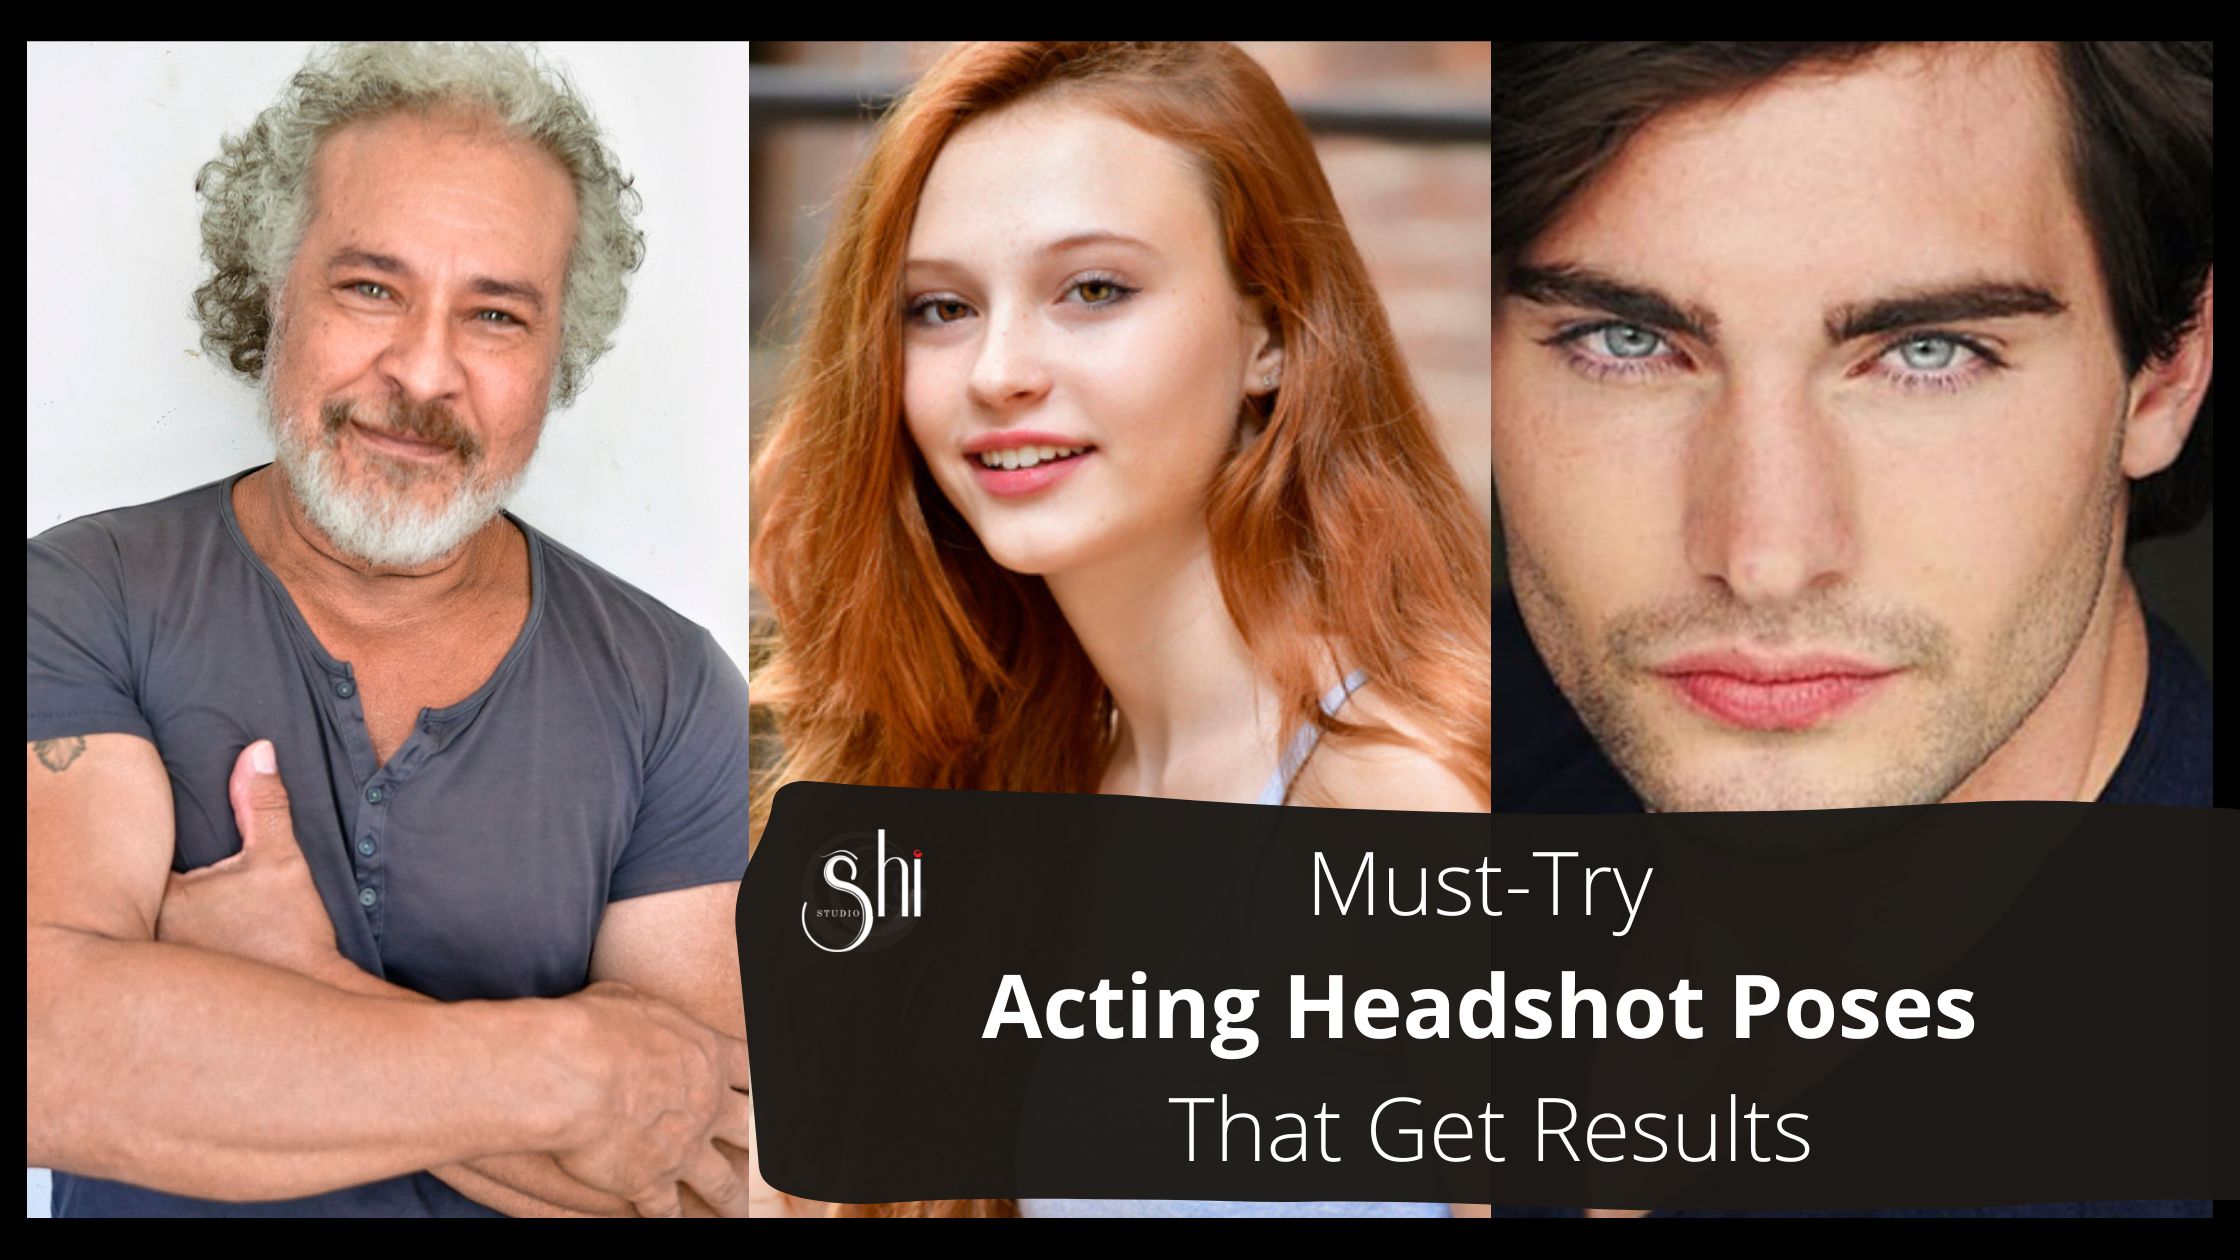 25 Must-Try Acting Headshot Poses That Get Results